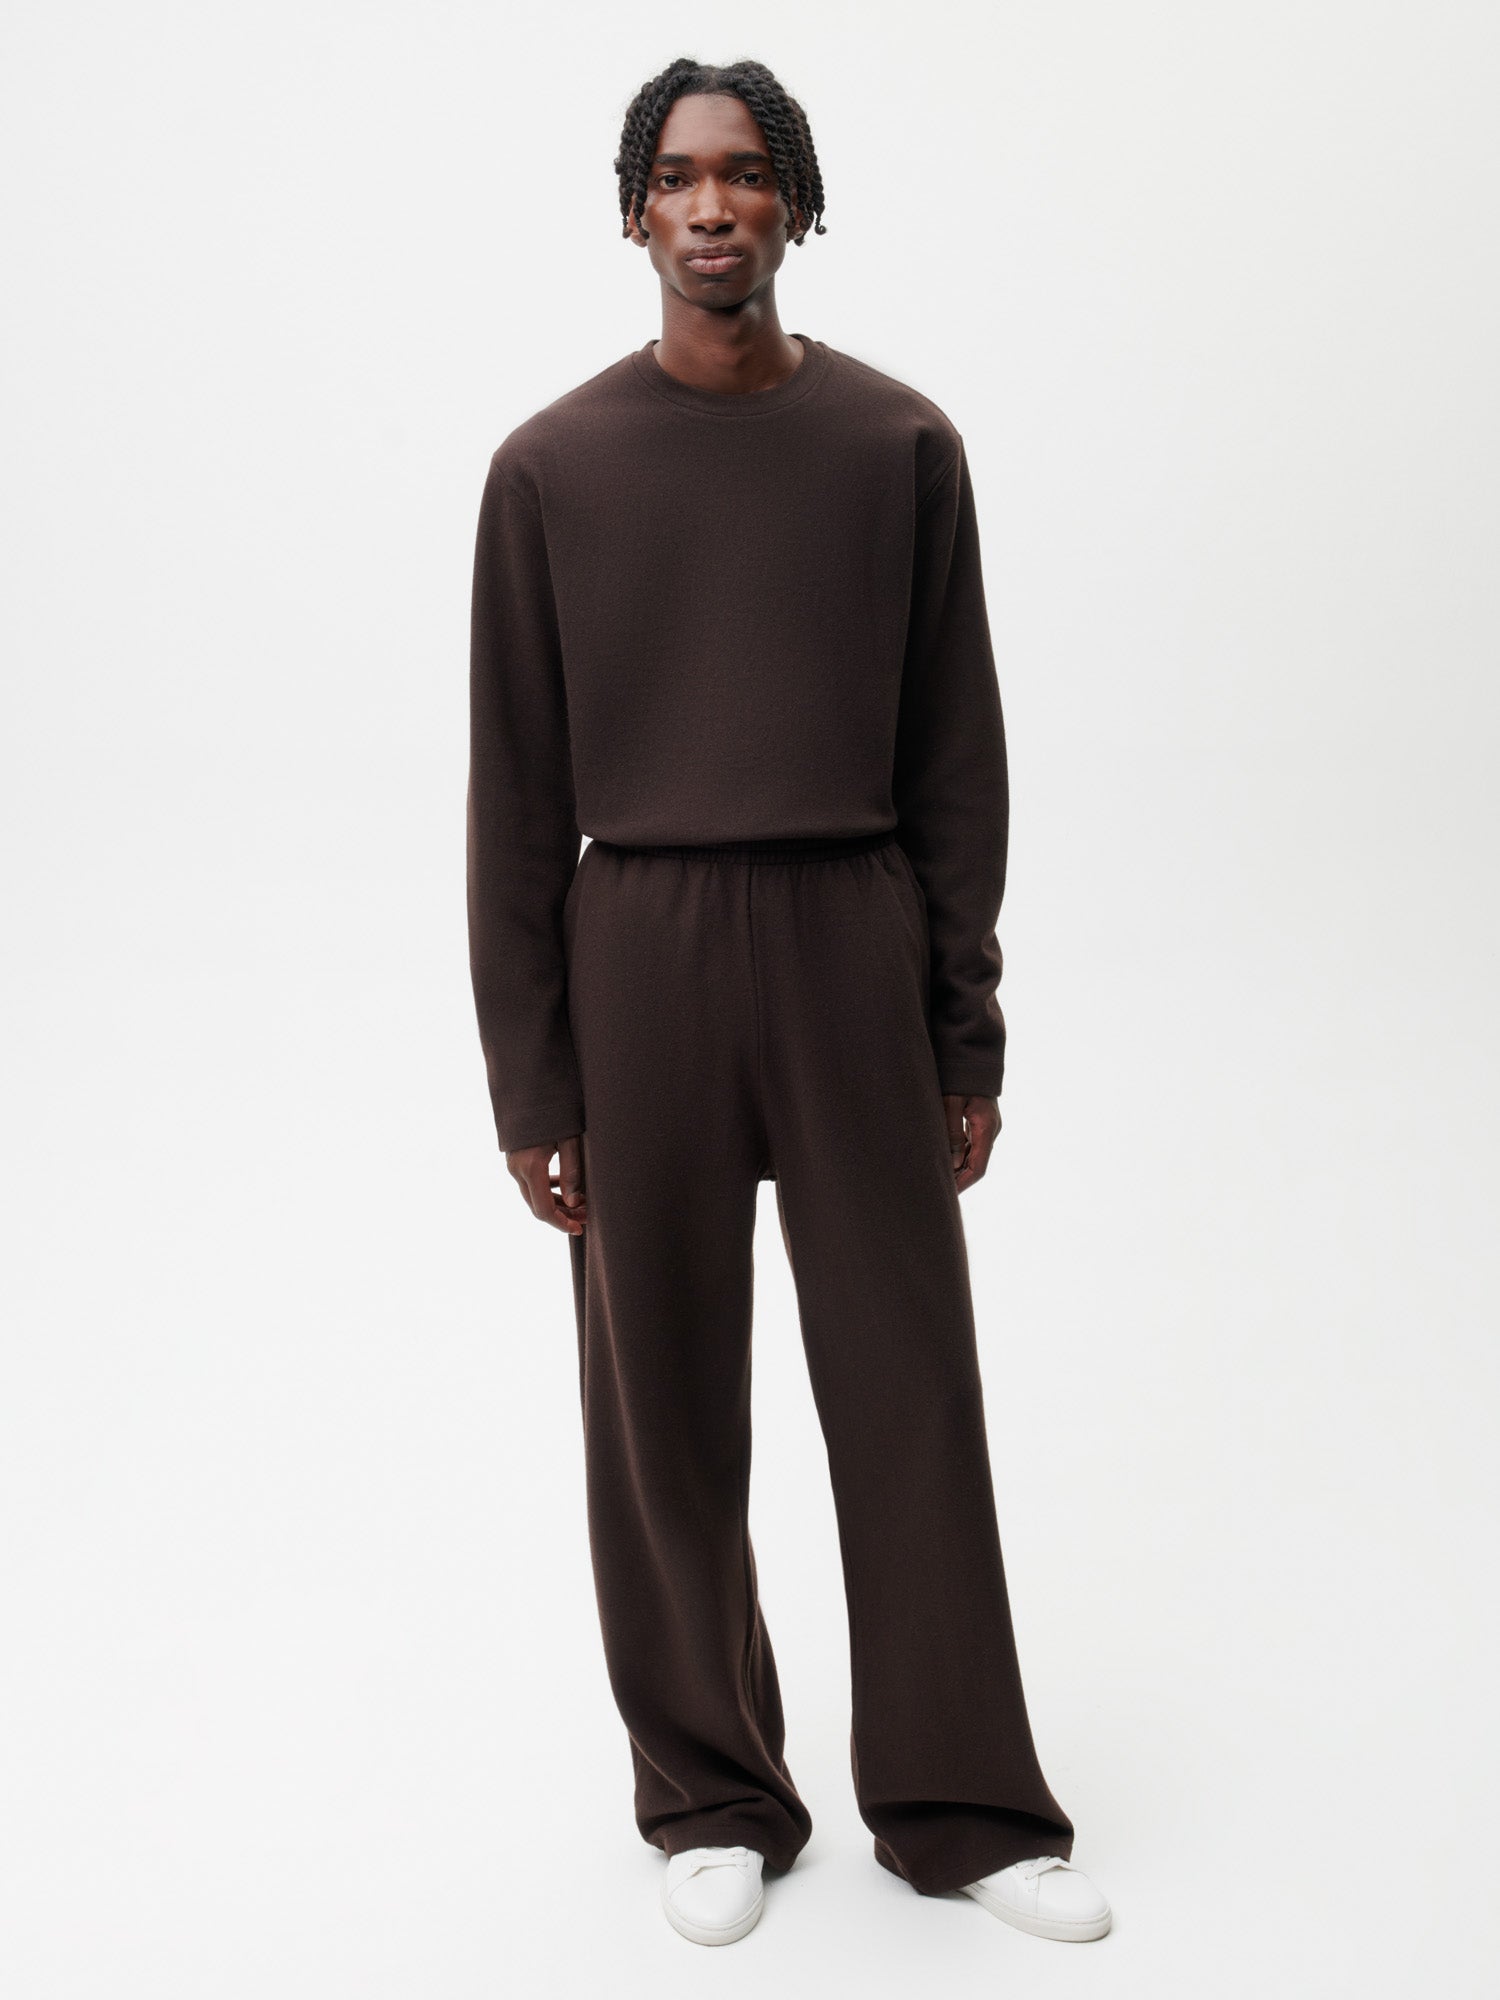 Recycled-Wool-Jersey-Pants-Chestnut-Brown-Male-1